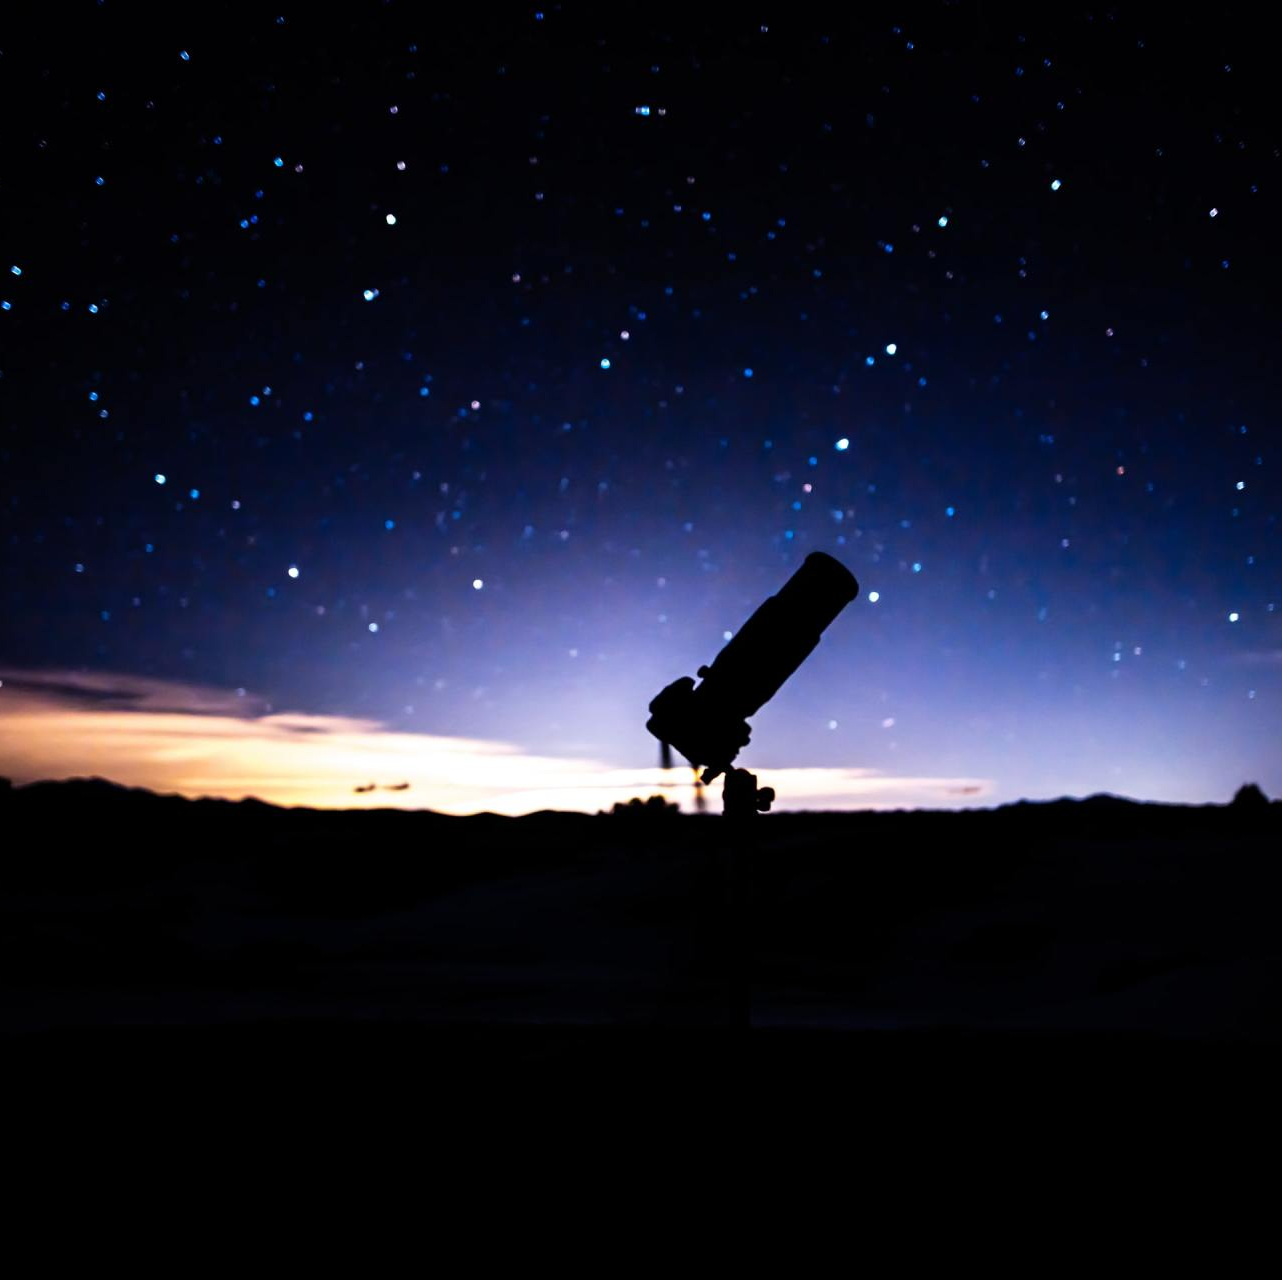 Photograph of a telescope in shadow against the night sky